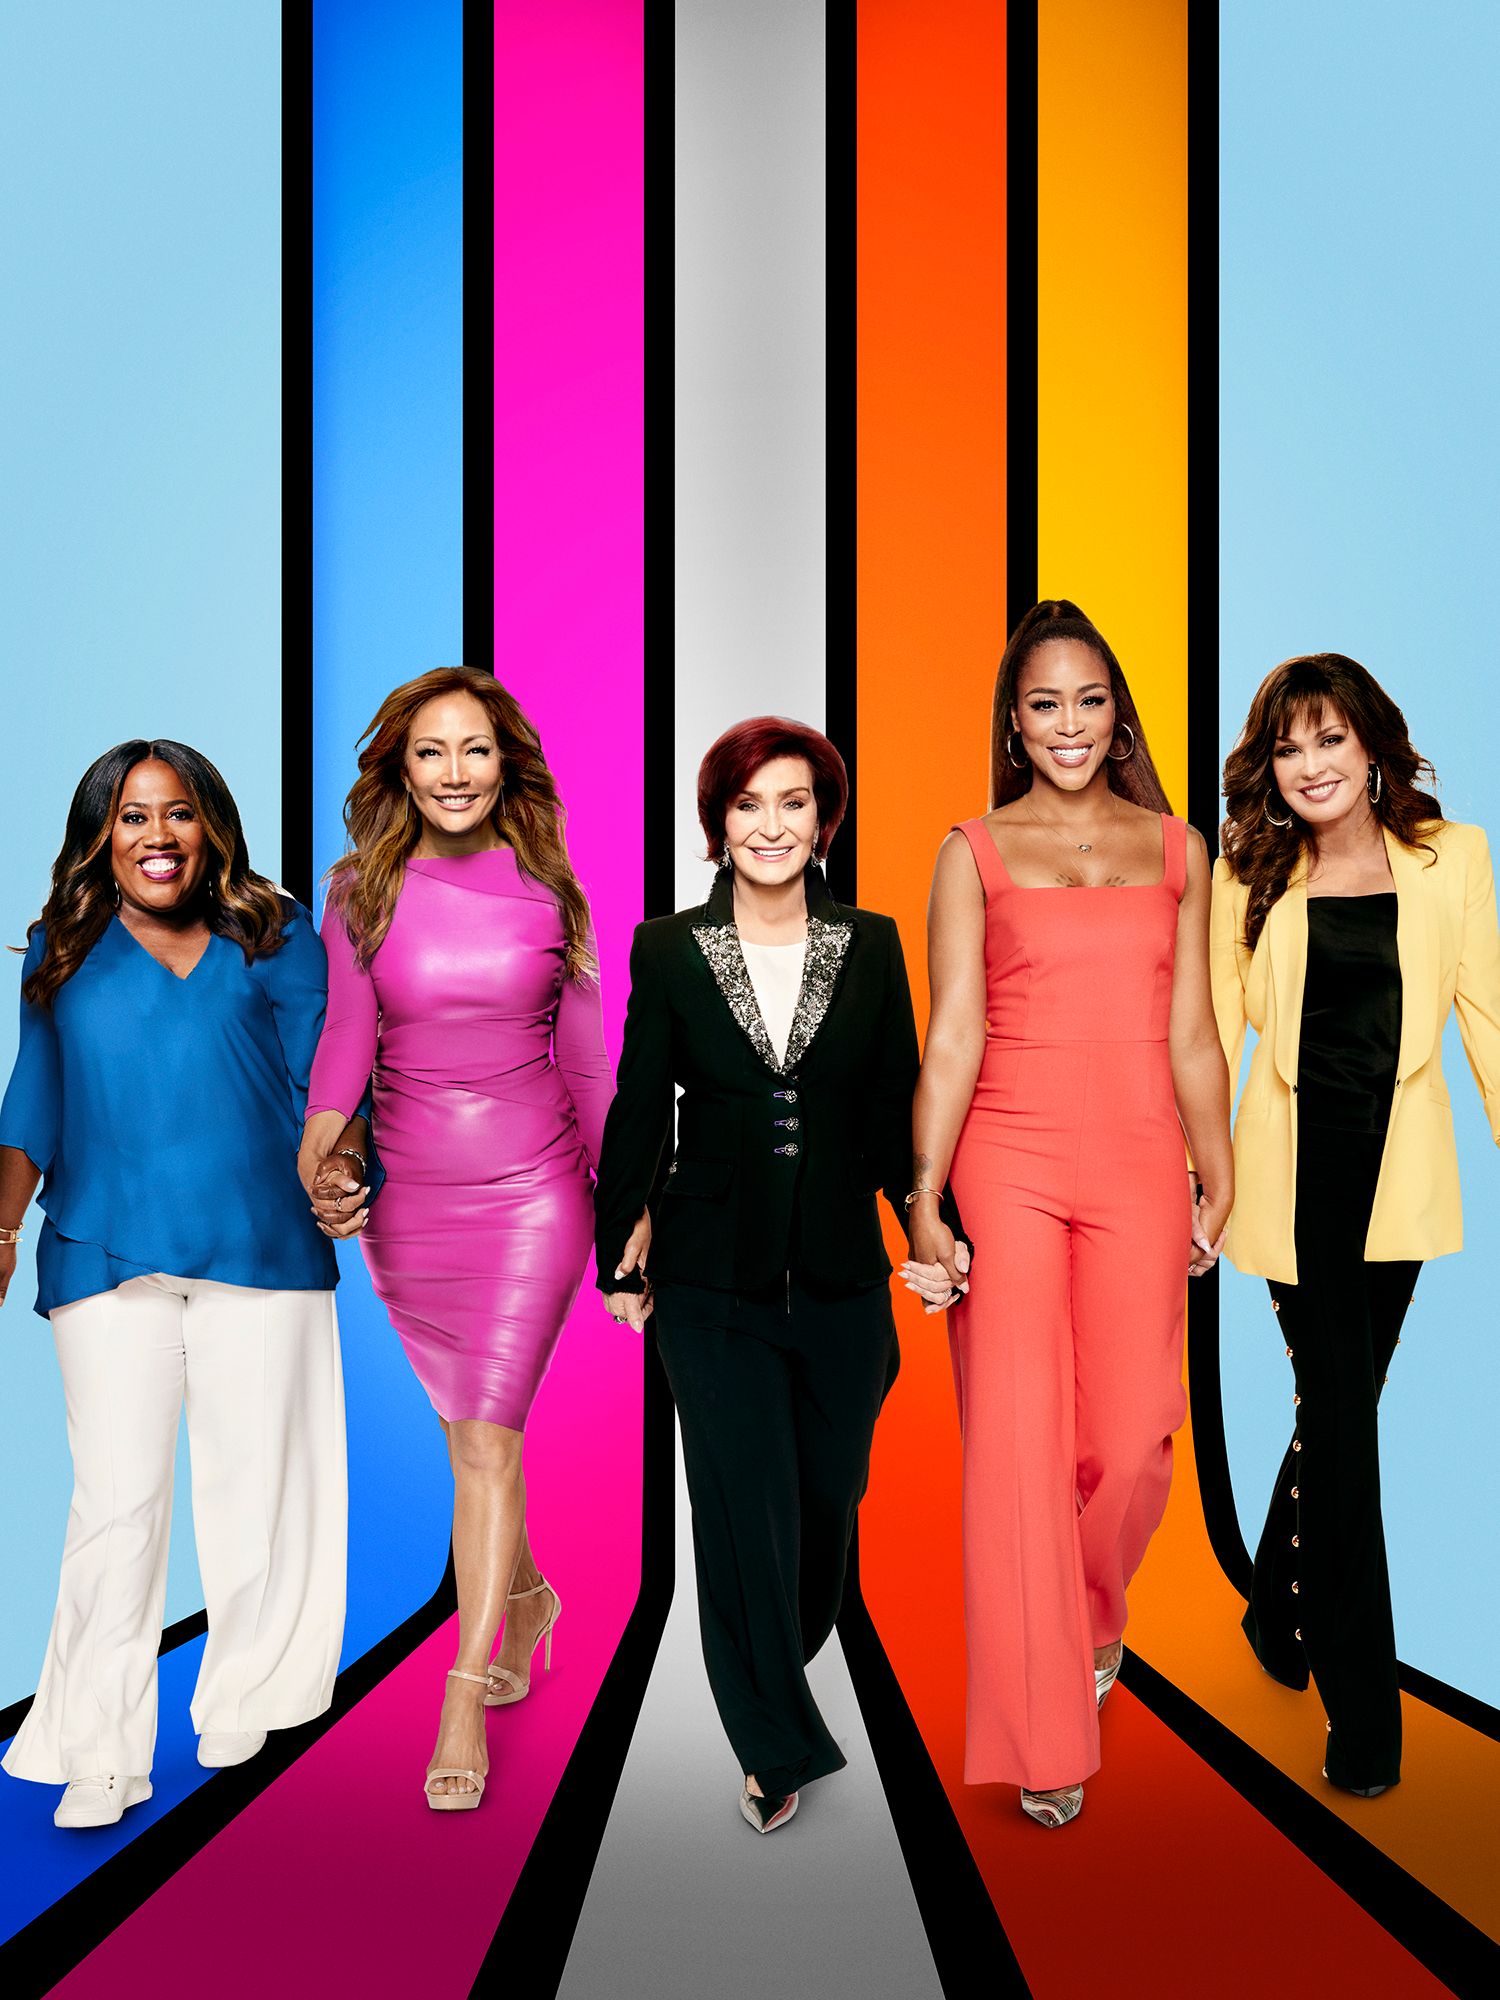 Sheryl Underwood, Carrie Ann Inaba, Sharon Osbourne, Eve Cooper, and Marie Osmond, the hosts of "The Talk." Photo taken on September 04, 2019 | Photo: Art Streiber/CBS via Getty Images